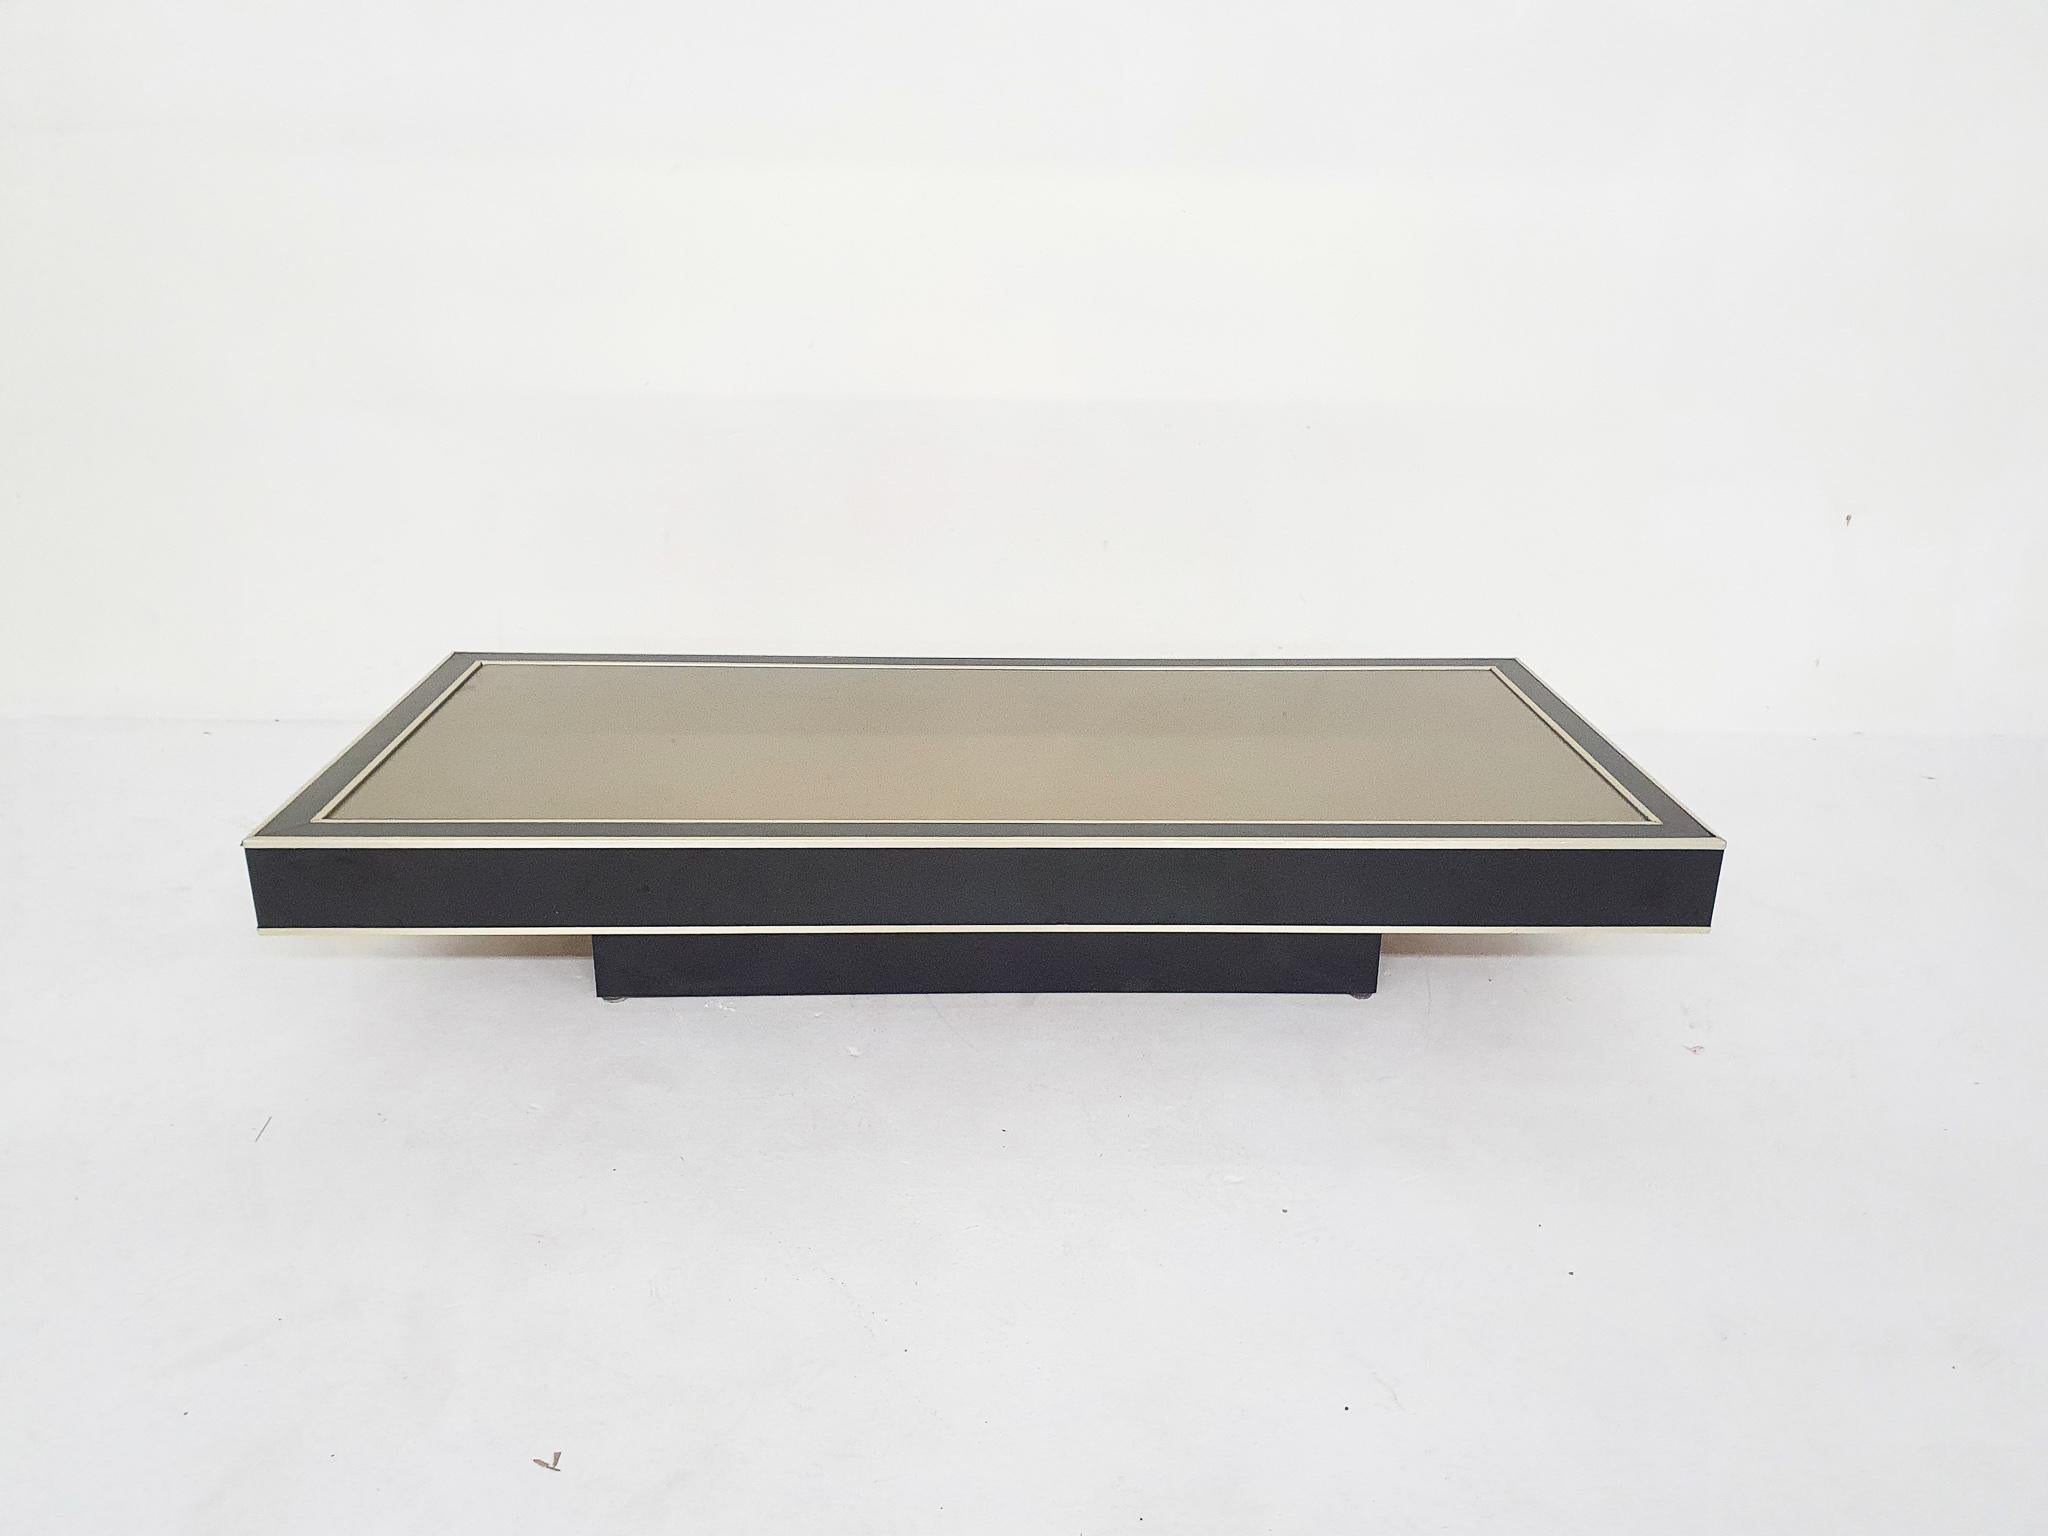 Mid-Century Modern Willy Rizzo Attrb. Mirrored Coffee Table, Belgium 1970's